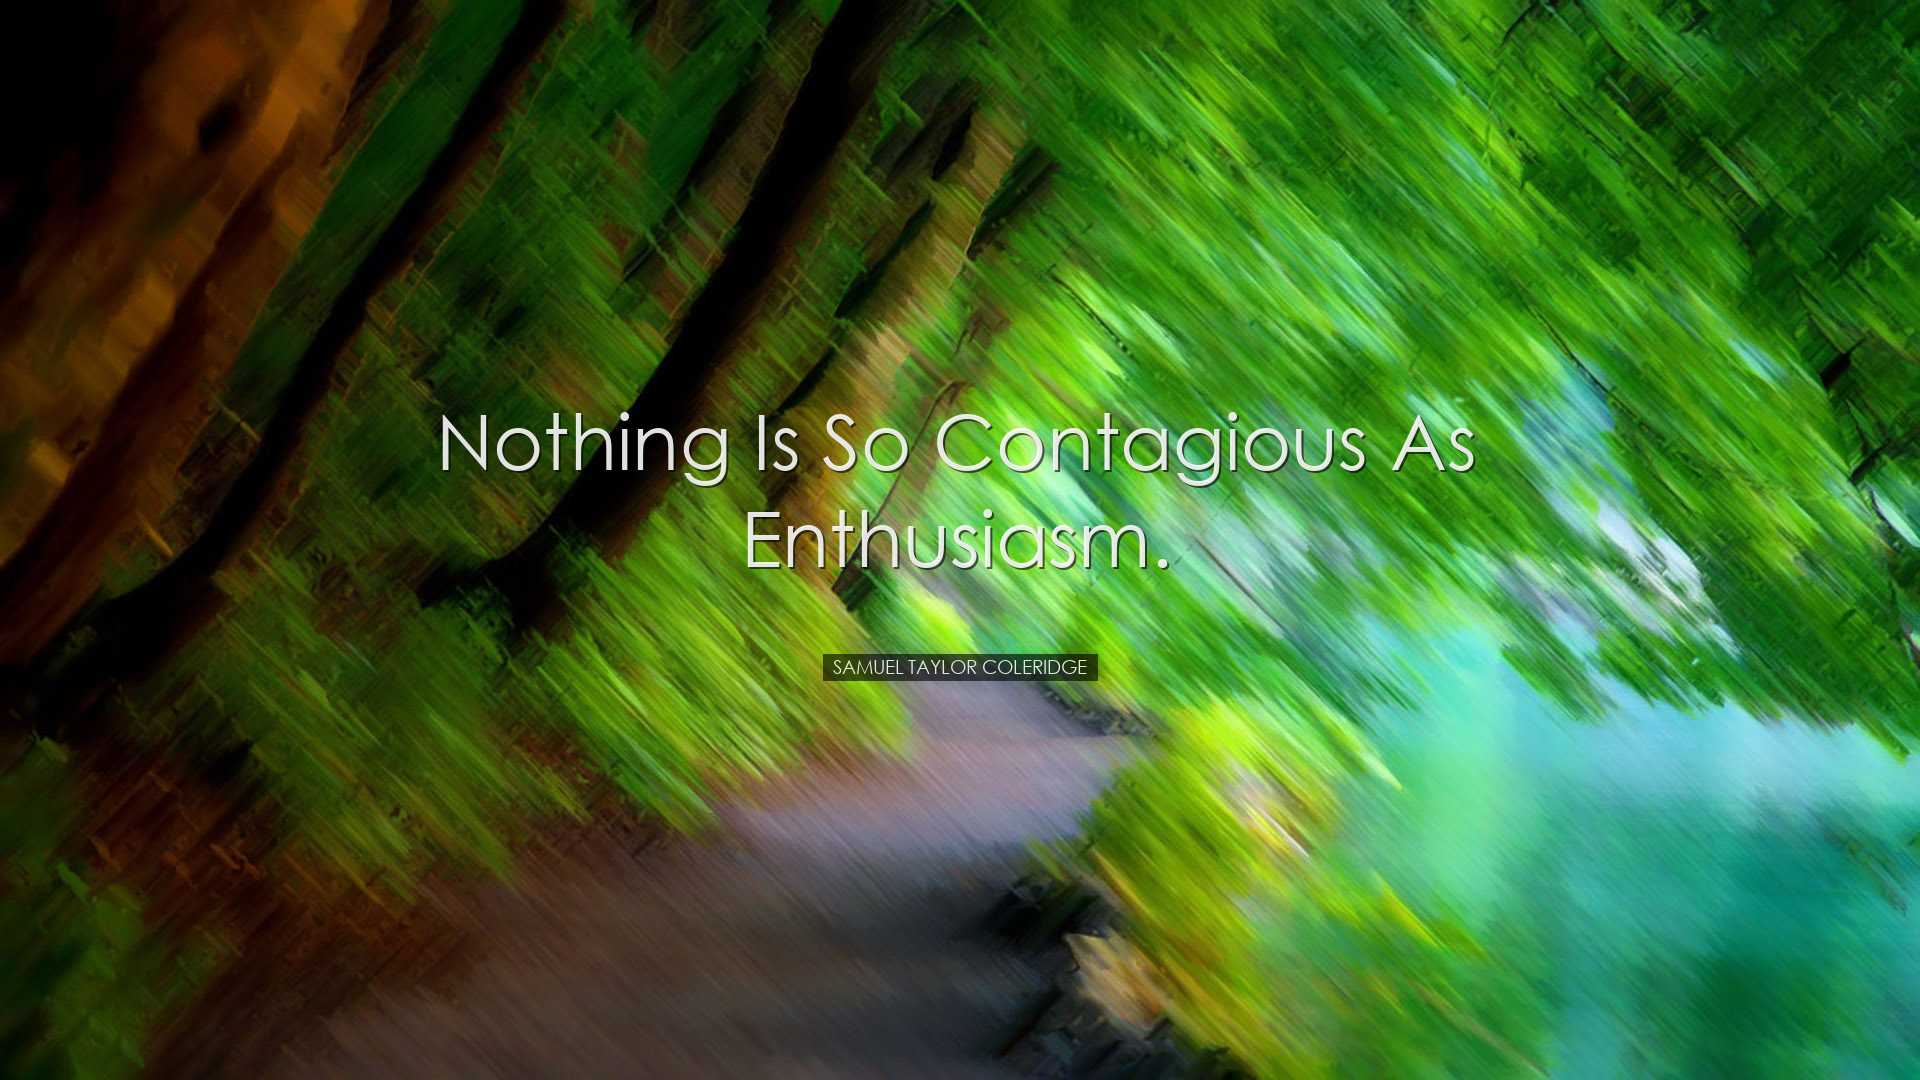 Nothing is so contagious as enthusiasm. - Samuel Taylor Coleridge